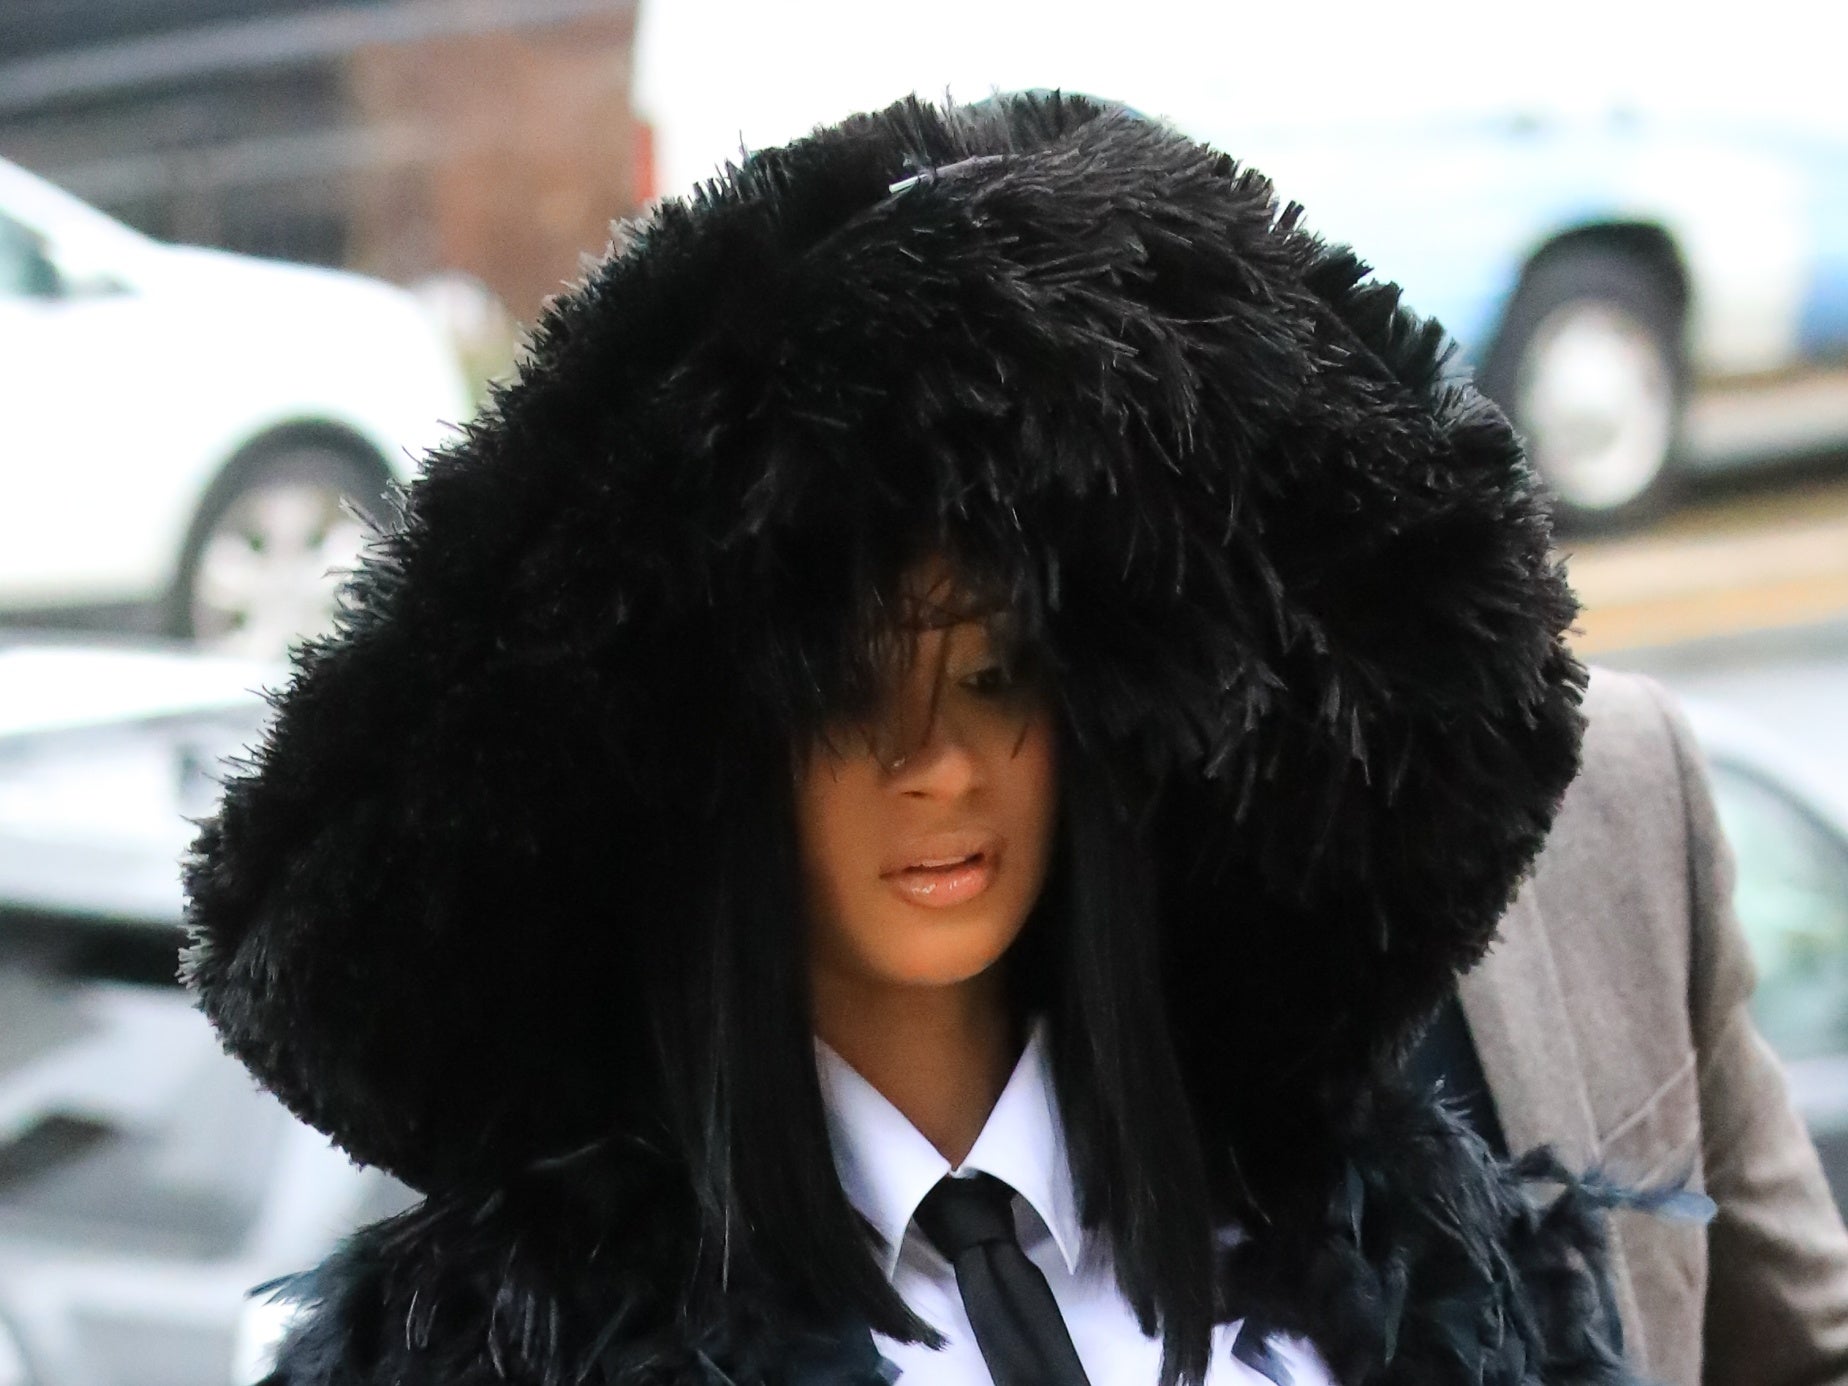 Cardi B Shows Up To Court In A Feathered Train